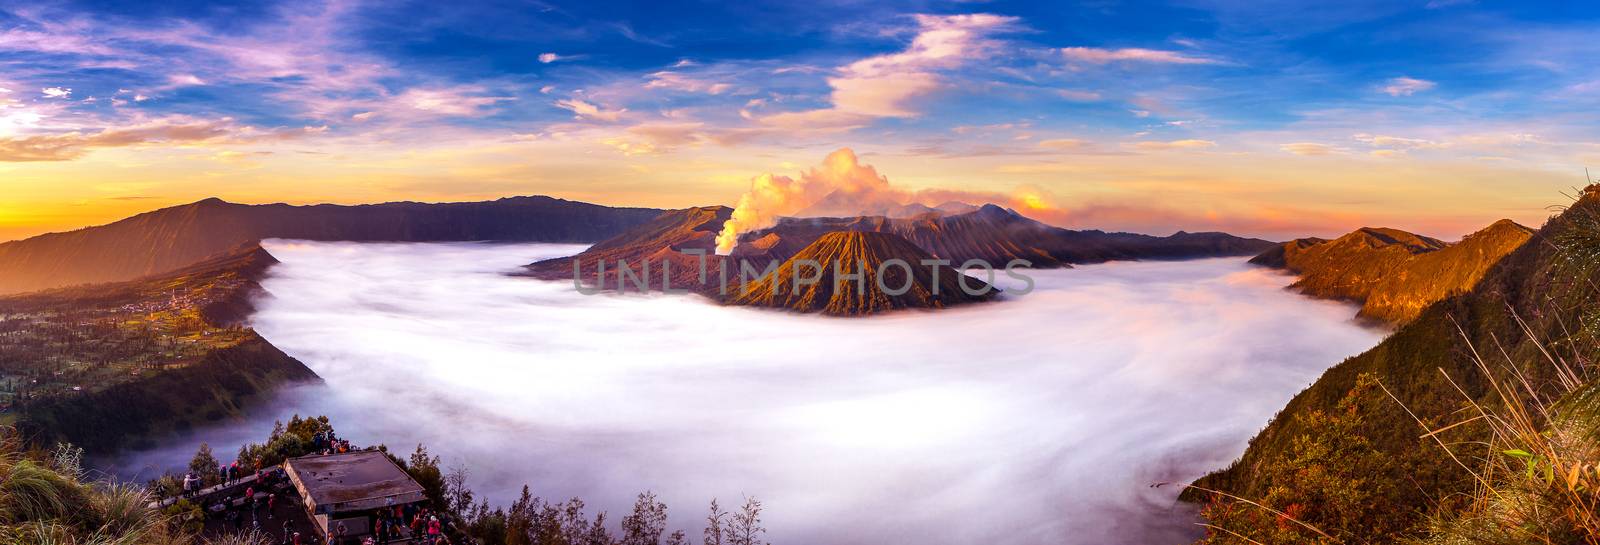 Mount Bromo volcano (Gunung Bromo) during sunrise from viewpoint on Mount Penanjakan in Bromo Tengger Semeru National Park, East Java, Indonesia. by gutarphotoghaphy